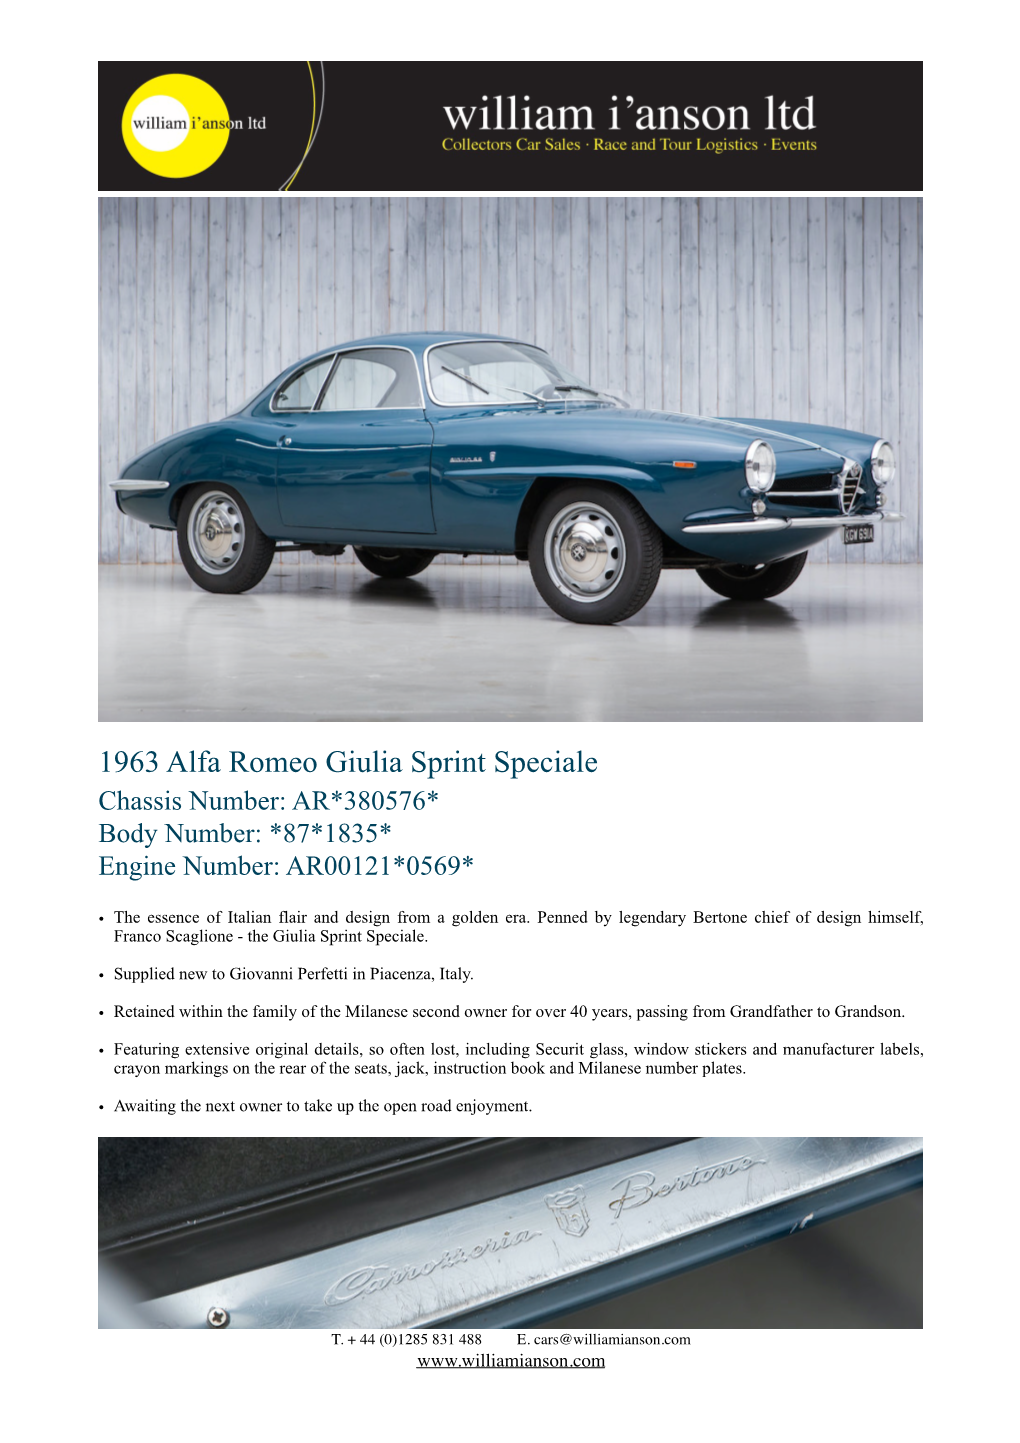 1963 Alfa Romeo Giulia Sprint Speciale Chassis Number: AR*380576* Body Number: *87*1835* Engine Number: AR00121*0569*